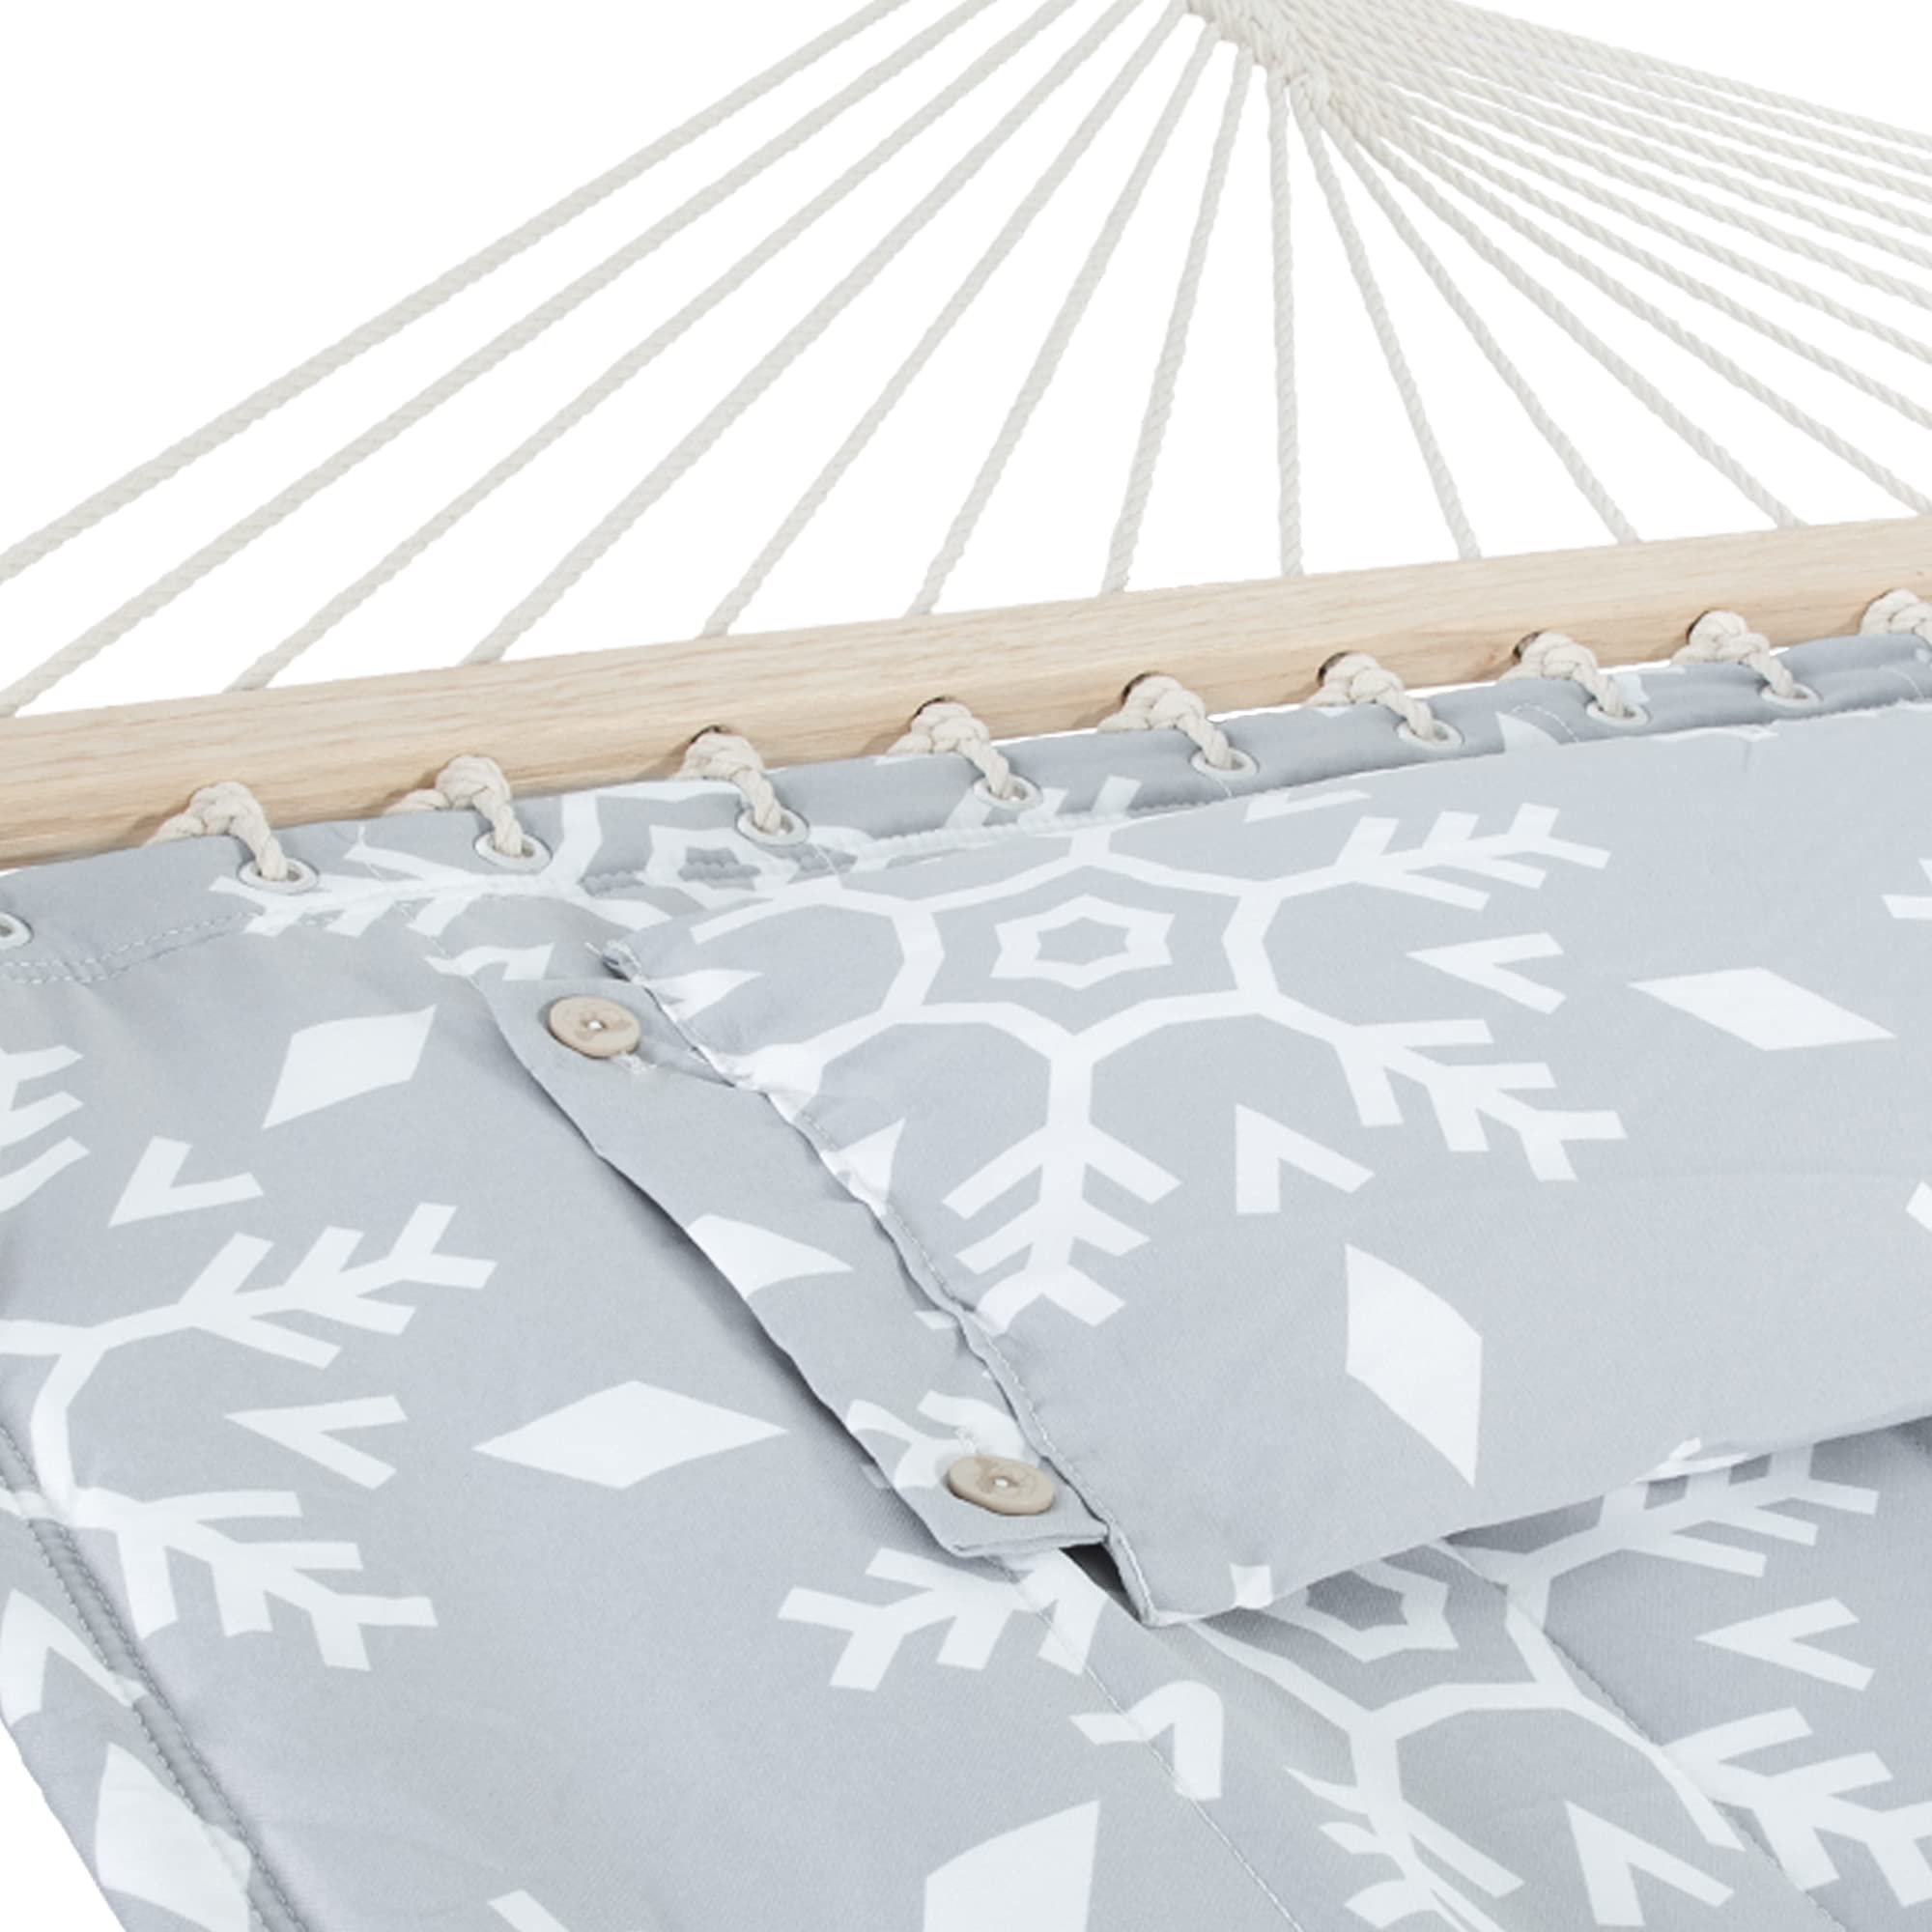 SUNCREAT-Double-Hammock-with-Stand-Snow#color_snow